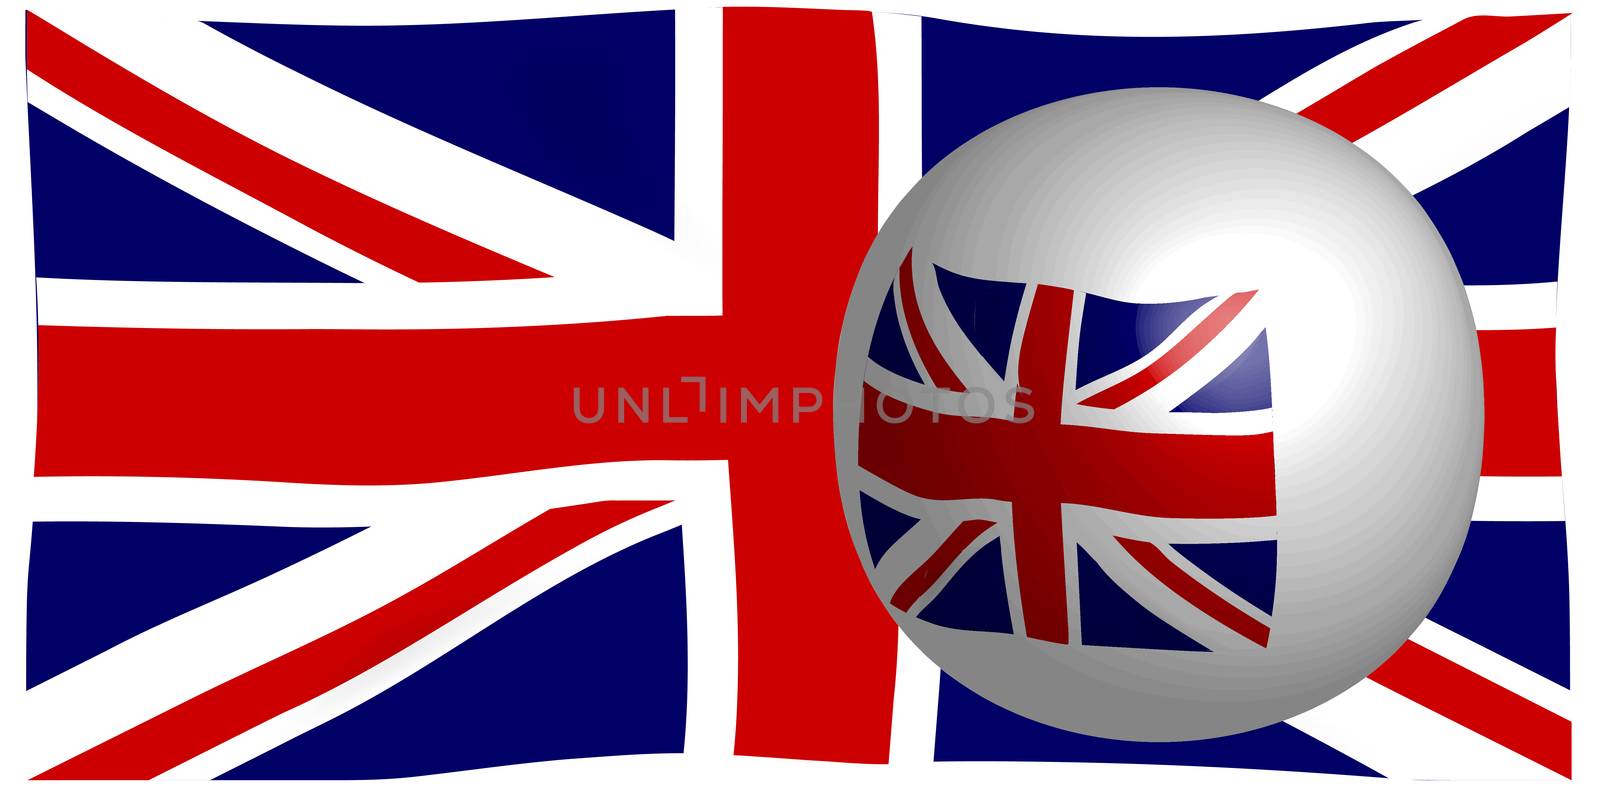 The British Union Flag, or Union Jack when used on board ship, isolated on white and reflected into a sphere.